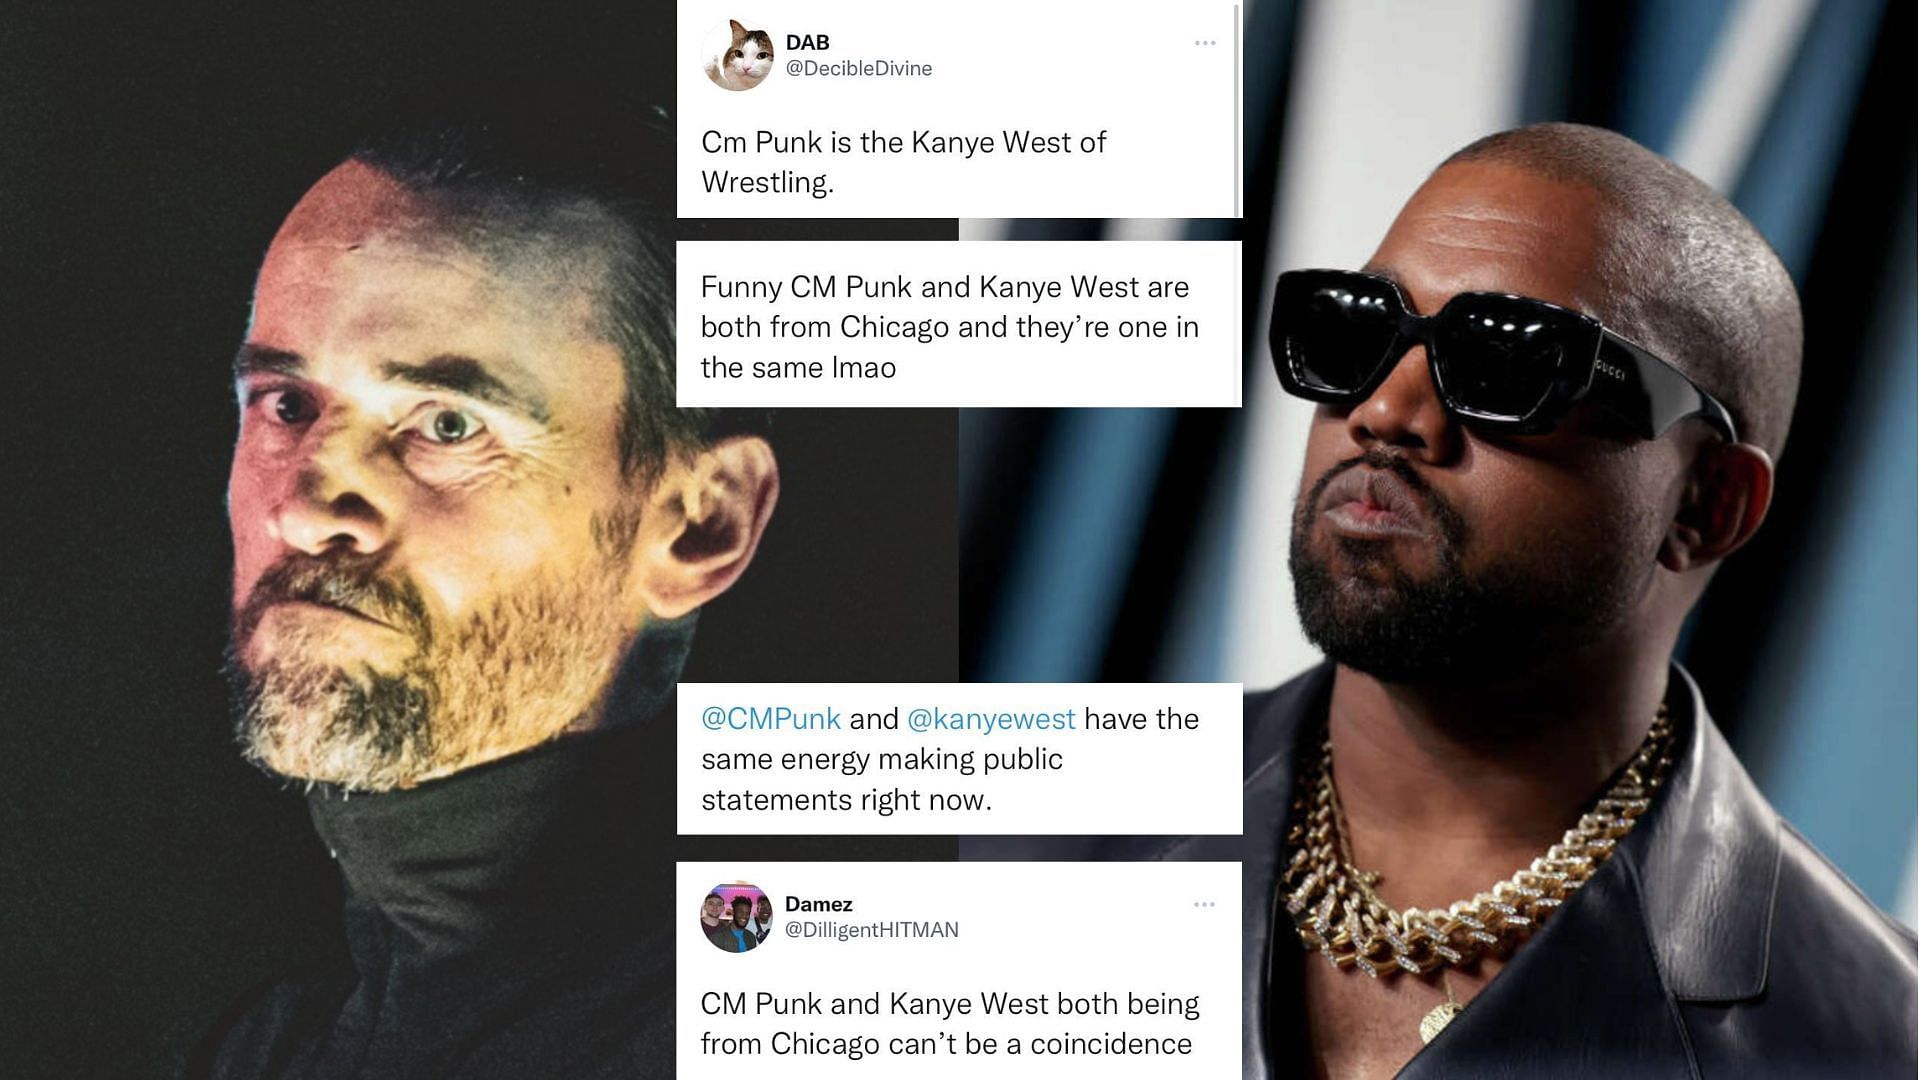 CM Punk has been compared to Kanye West on Twitter